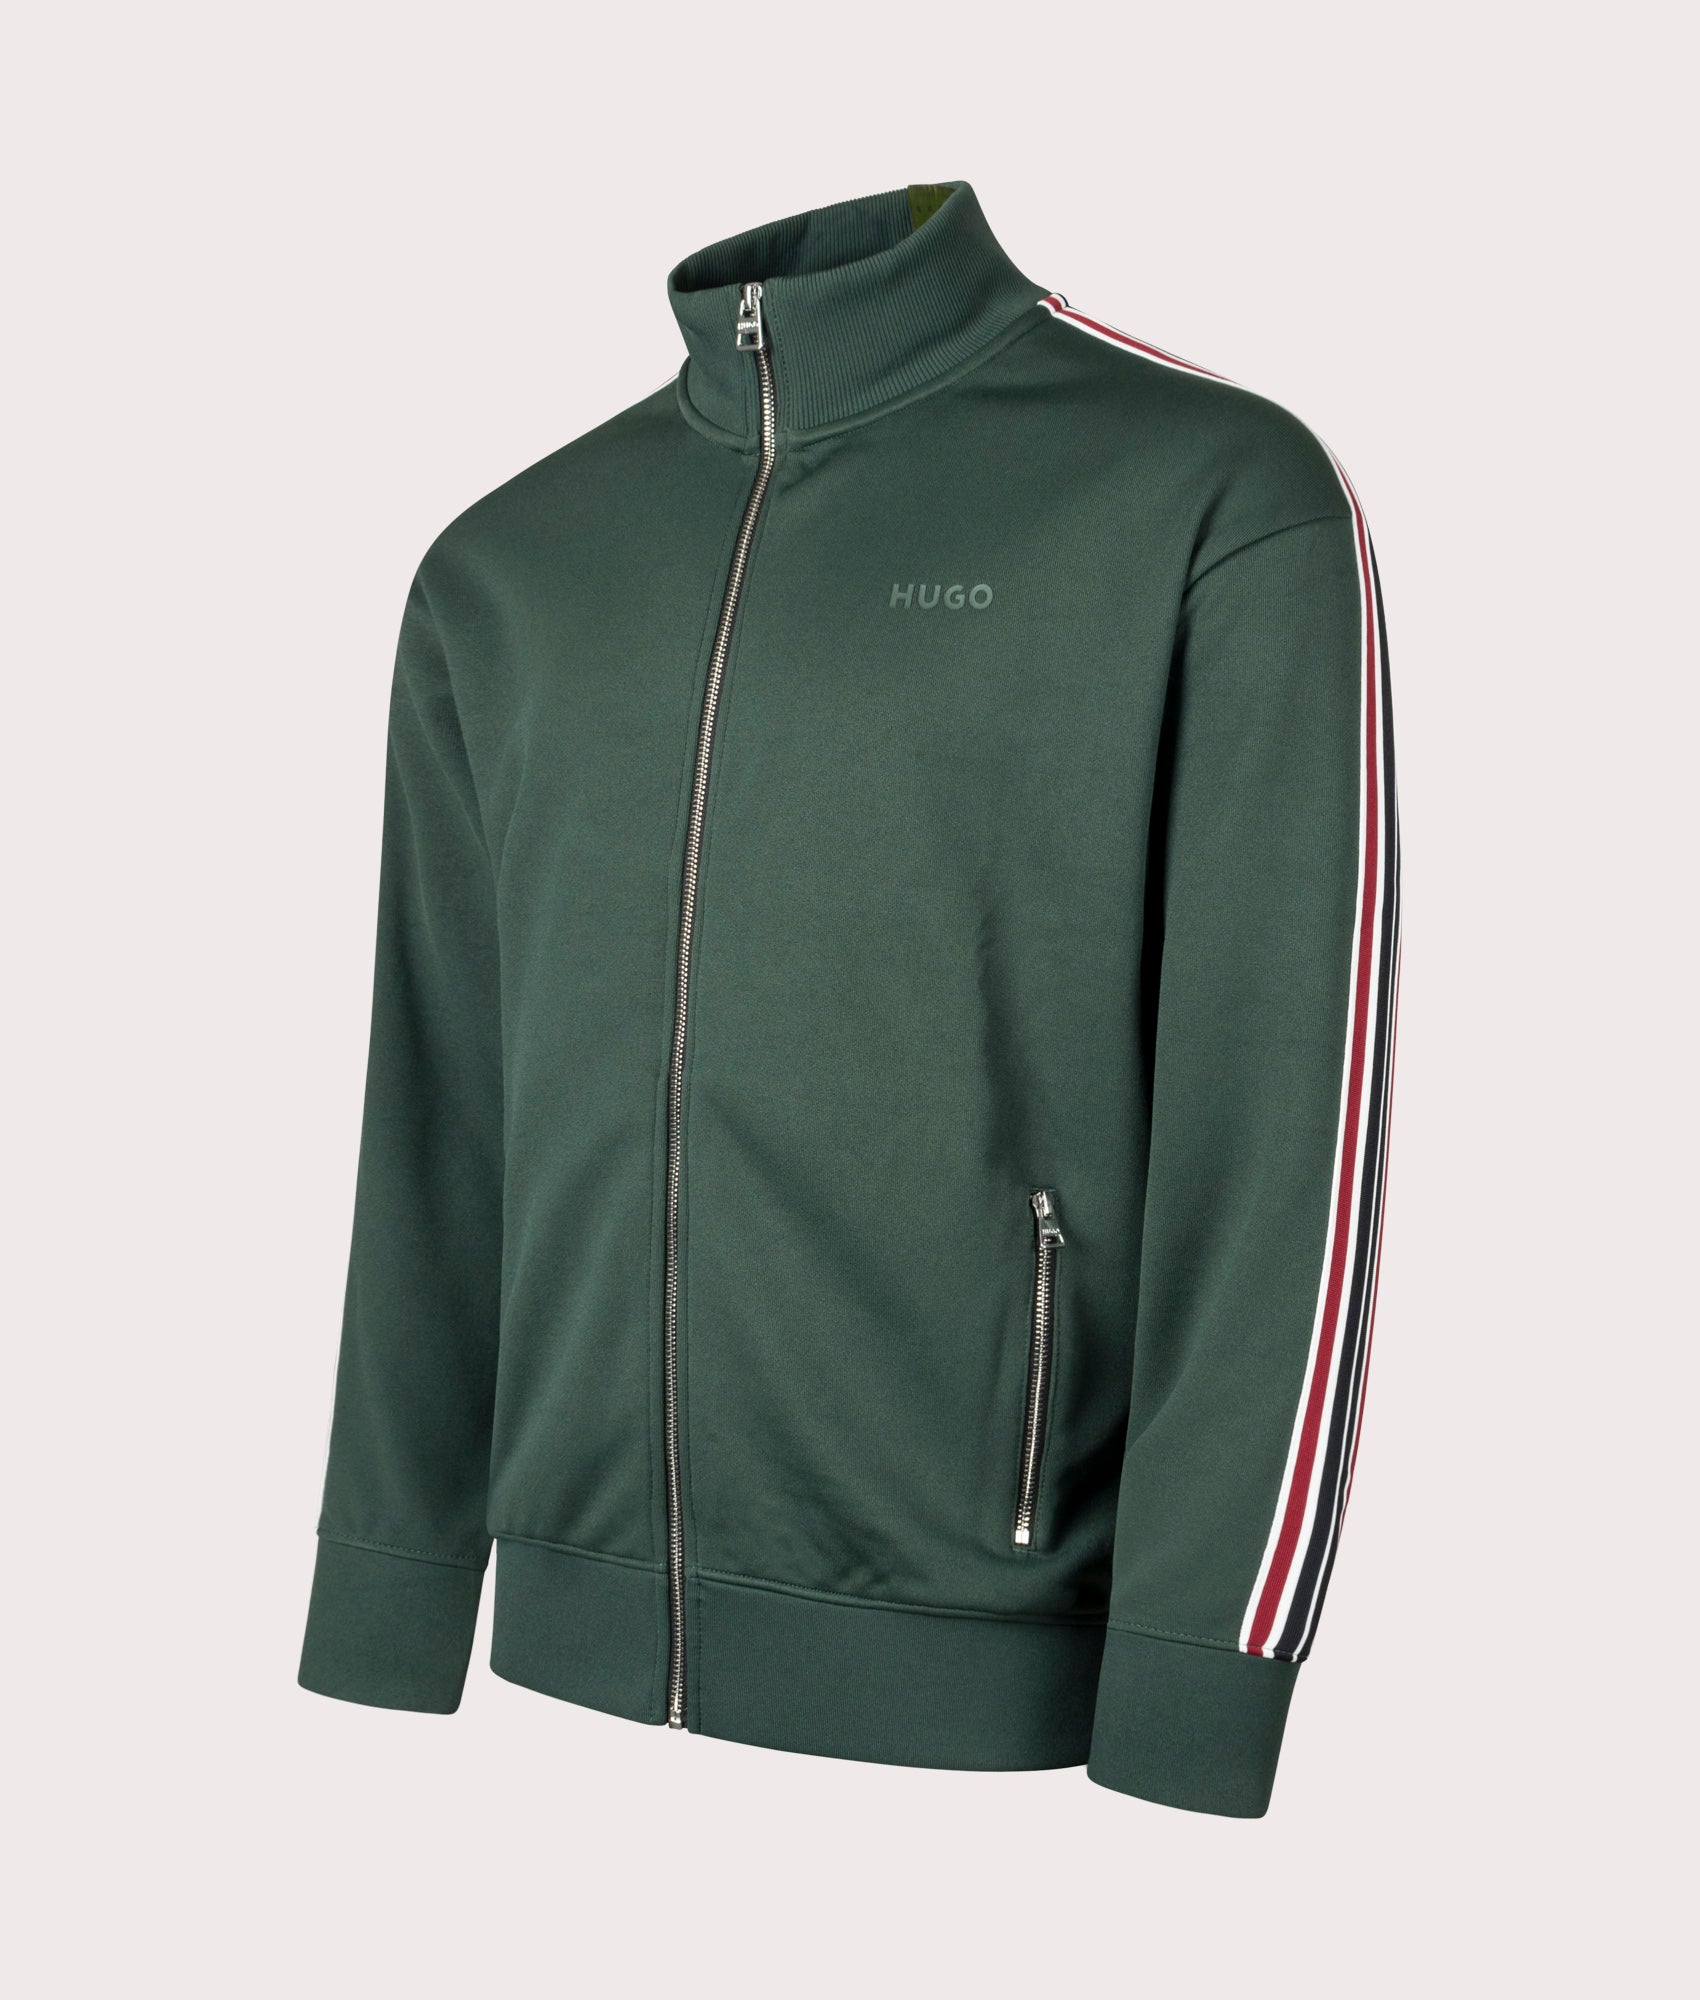 HUGO Mens Relaxed Fit Dalpens Track Top - Colour: 302 Dark Green - Size: Large